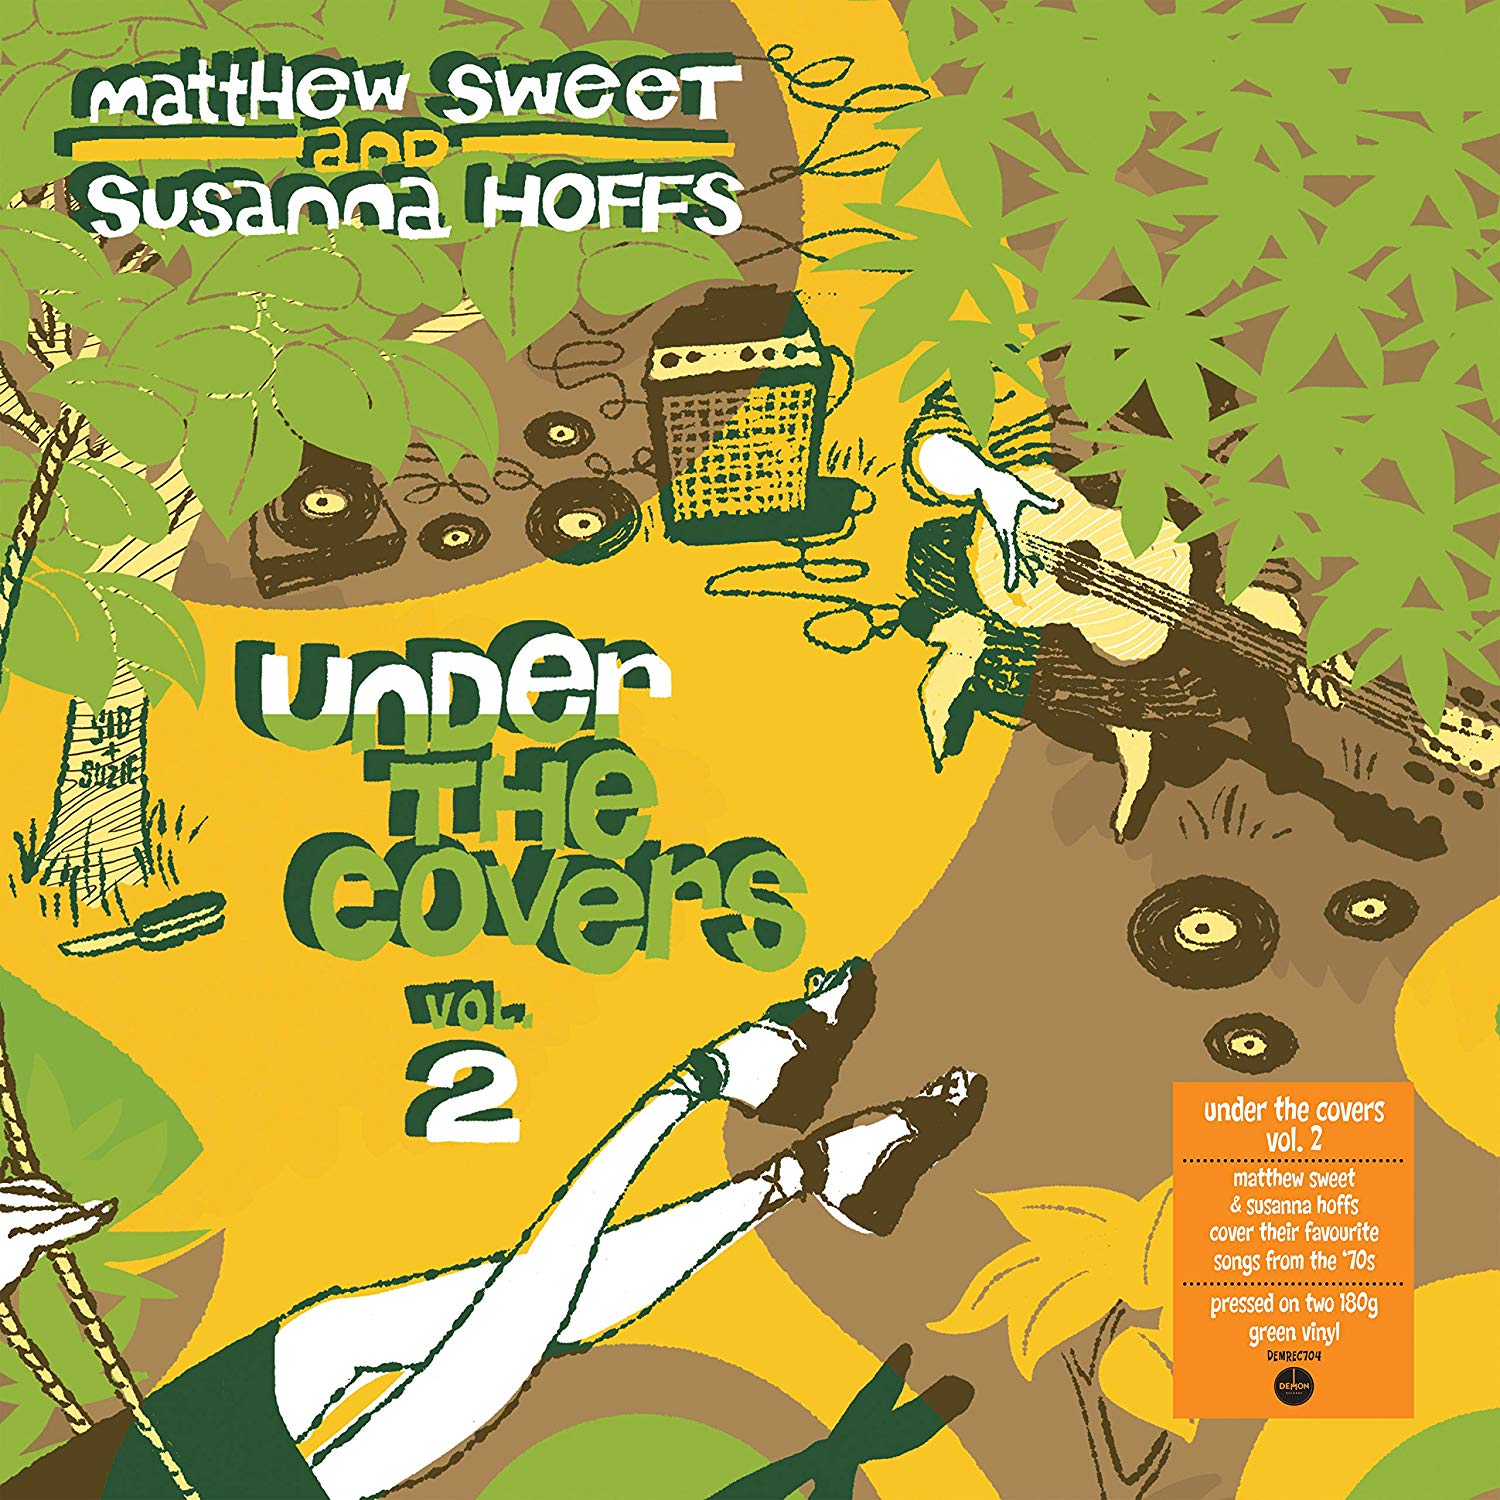 Under The Covers Vol. 2 Limited Green 180gram Heavyweight 2LP Set